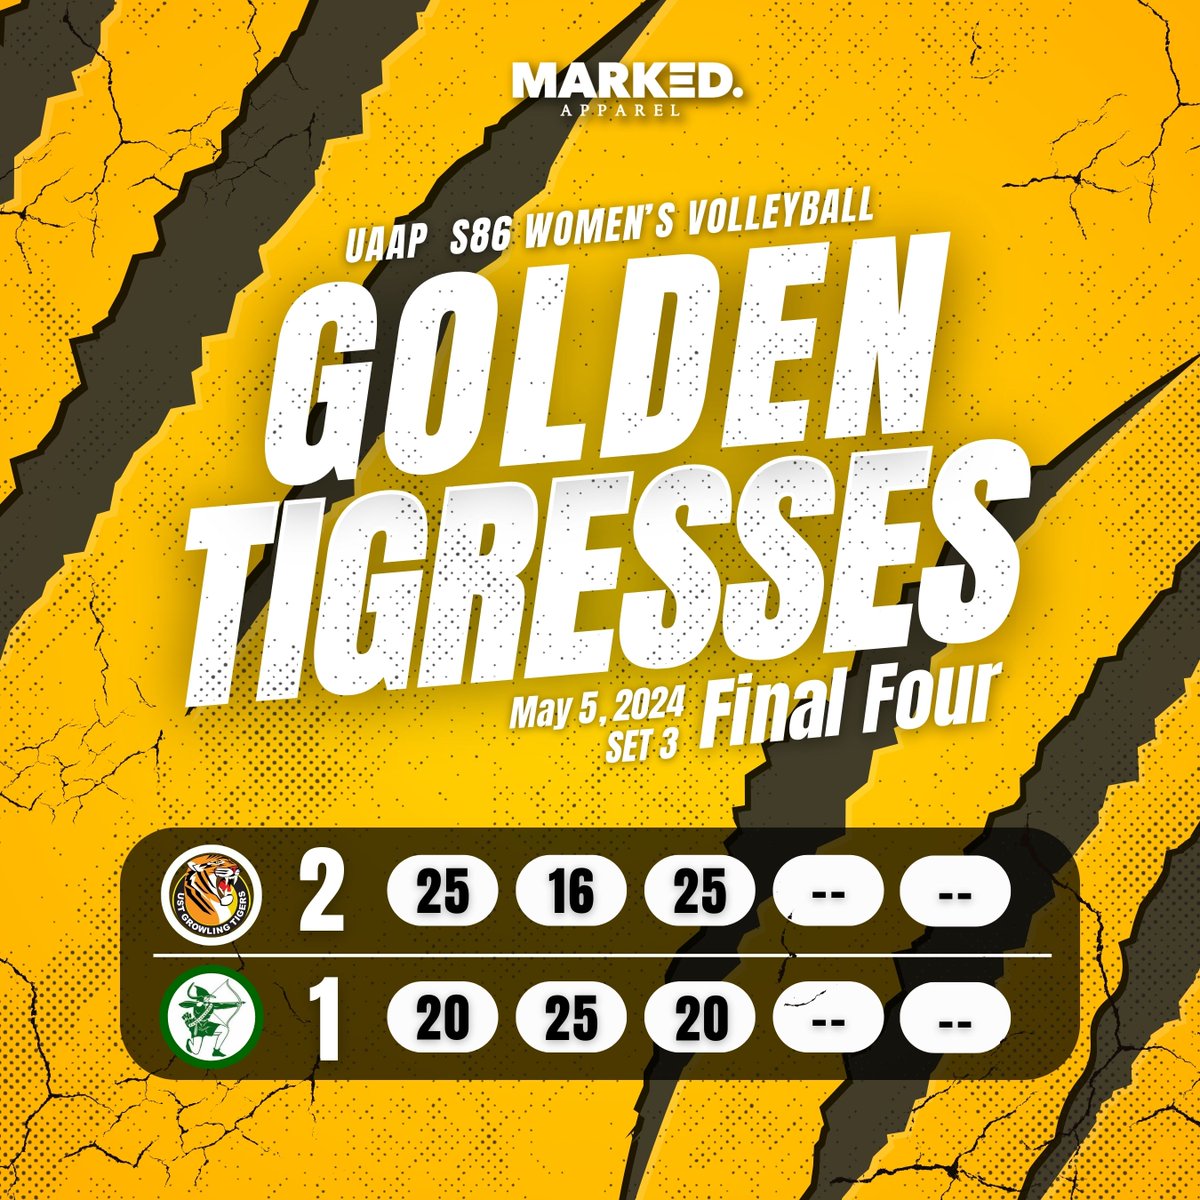 WE'RE 1 SET AWAY FROM THE FINALS!

UST rallies back with determination, clinching Set 3 in a thrilling display of skill and resilience! The momentum swings in our favor! 🏐💪

#GoUSTe #UAAPSeason86 #UAAPVolleyball #GetMarkedNow #USTvsDLSU #USTvsFEU